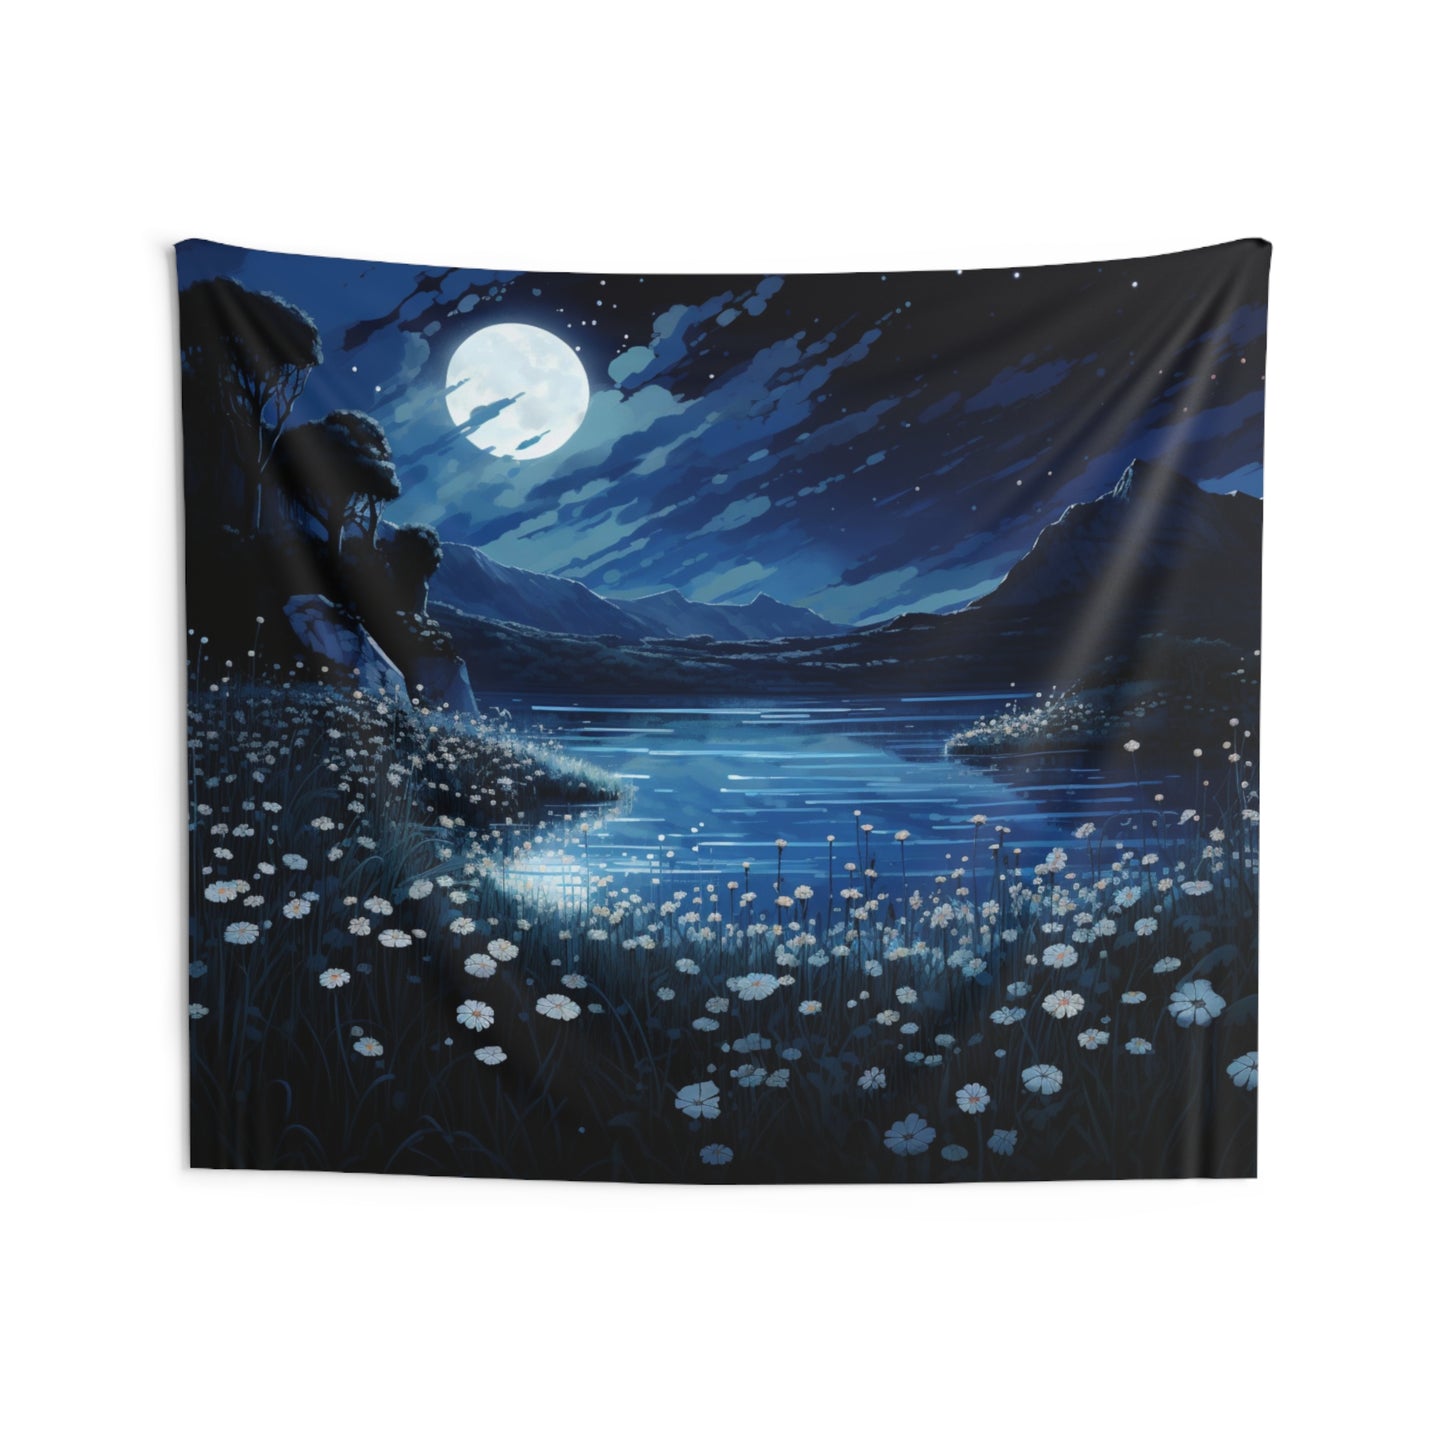 Dark Blue Night Sky Tapestry, Moon Dandelion Flowers Lake Wall Art Hanging Cool Unique Landscape Aesthetic Large Small Decor Bedroom Dorm Starcove Fashion